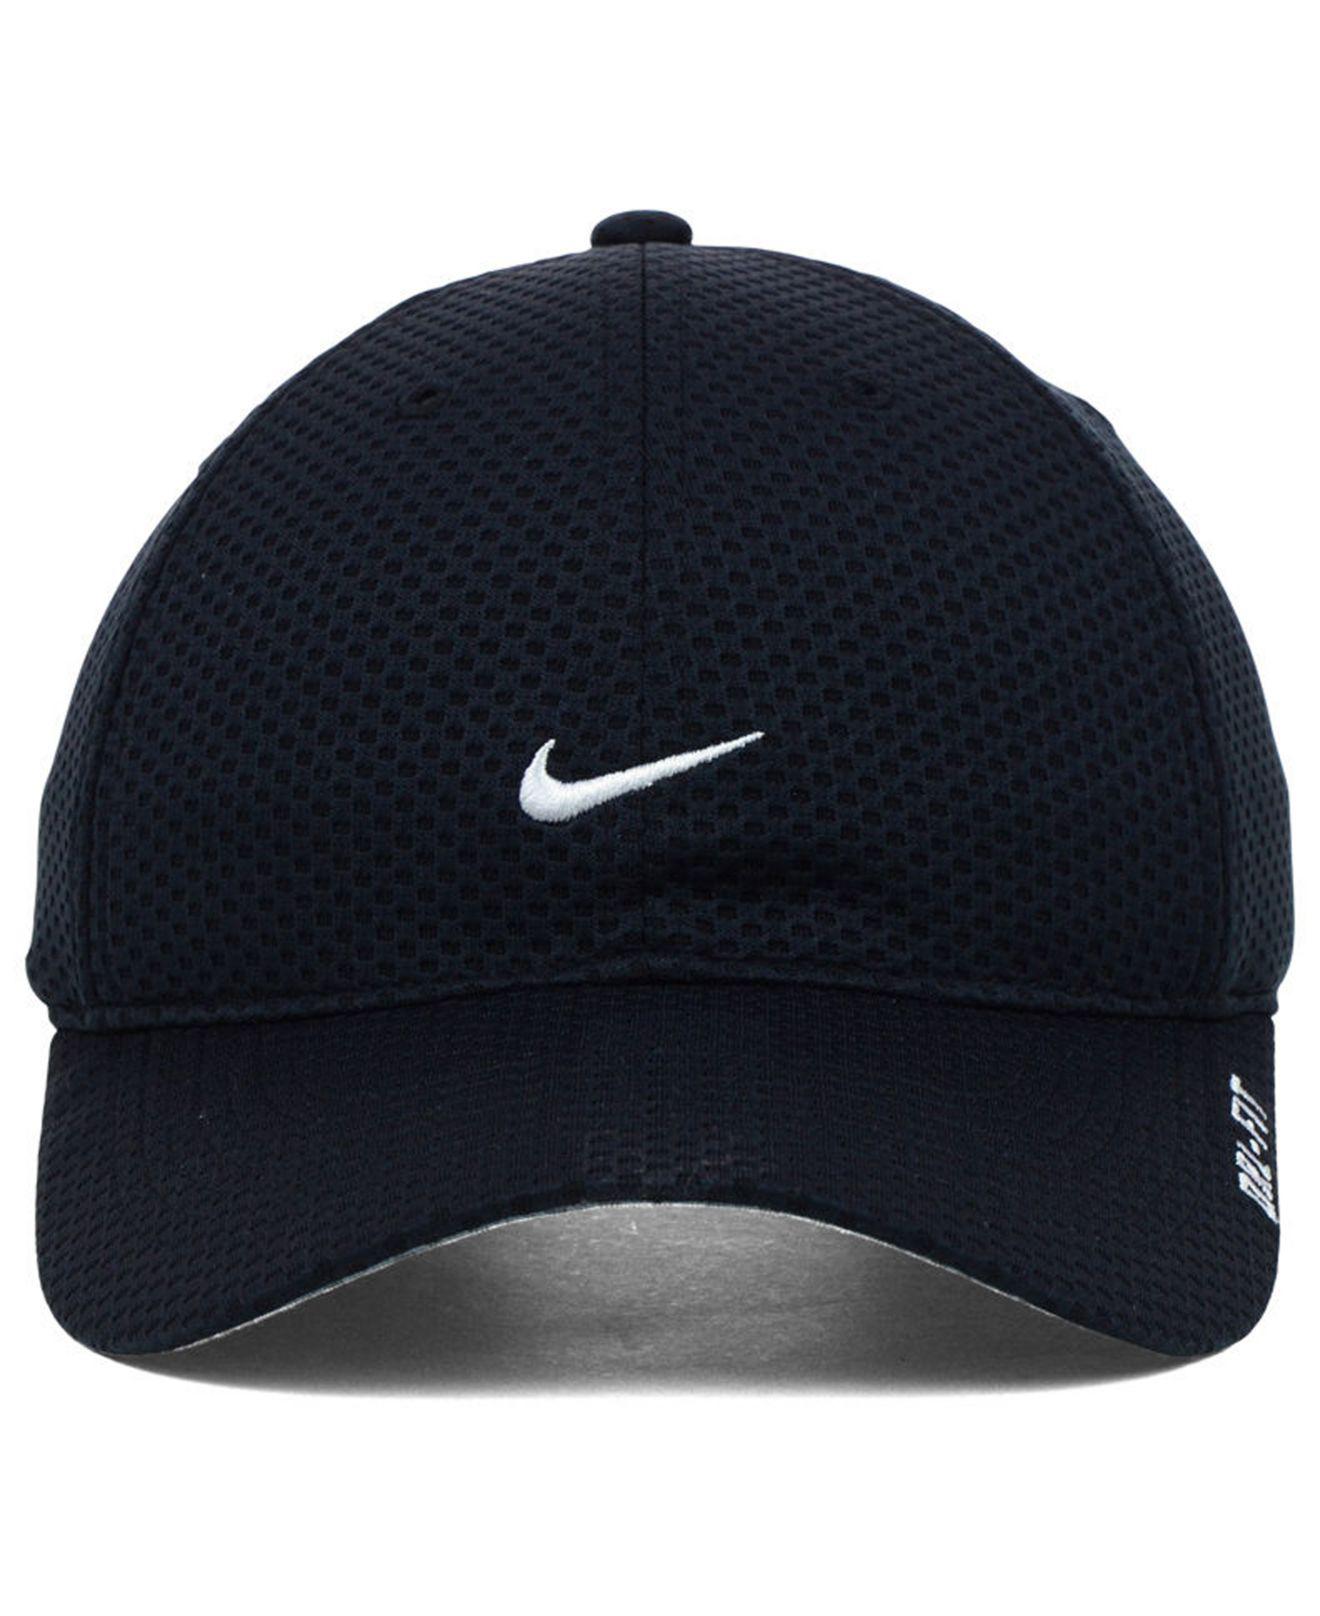 Nike Synthetic 6 Panel Tailwind Cap in 